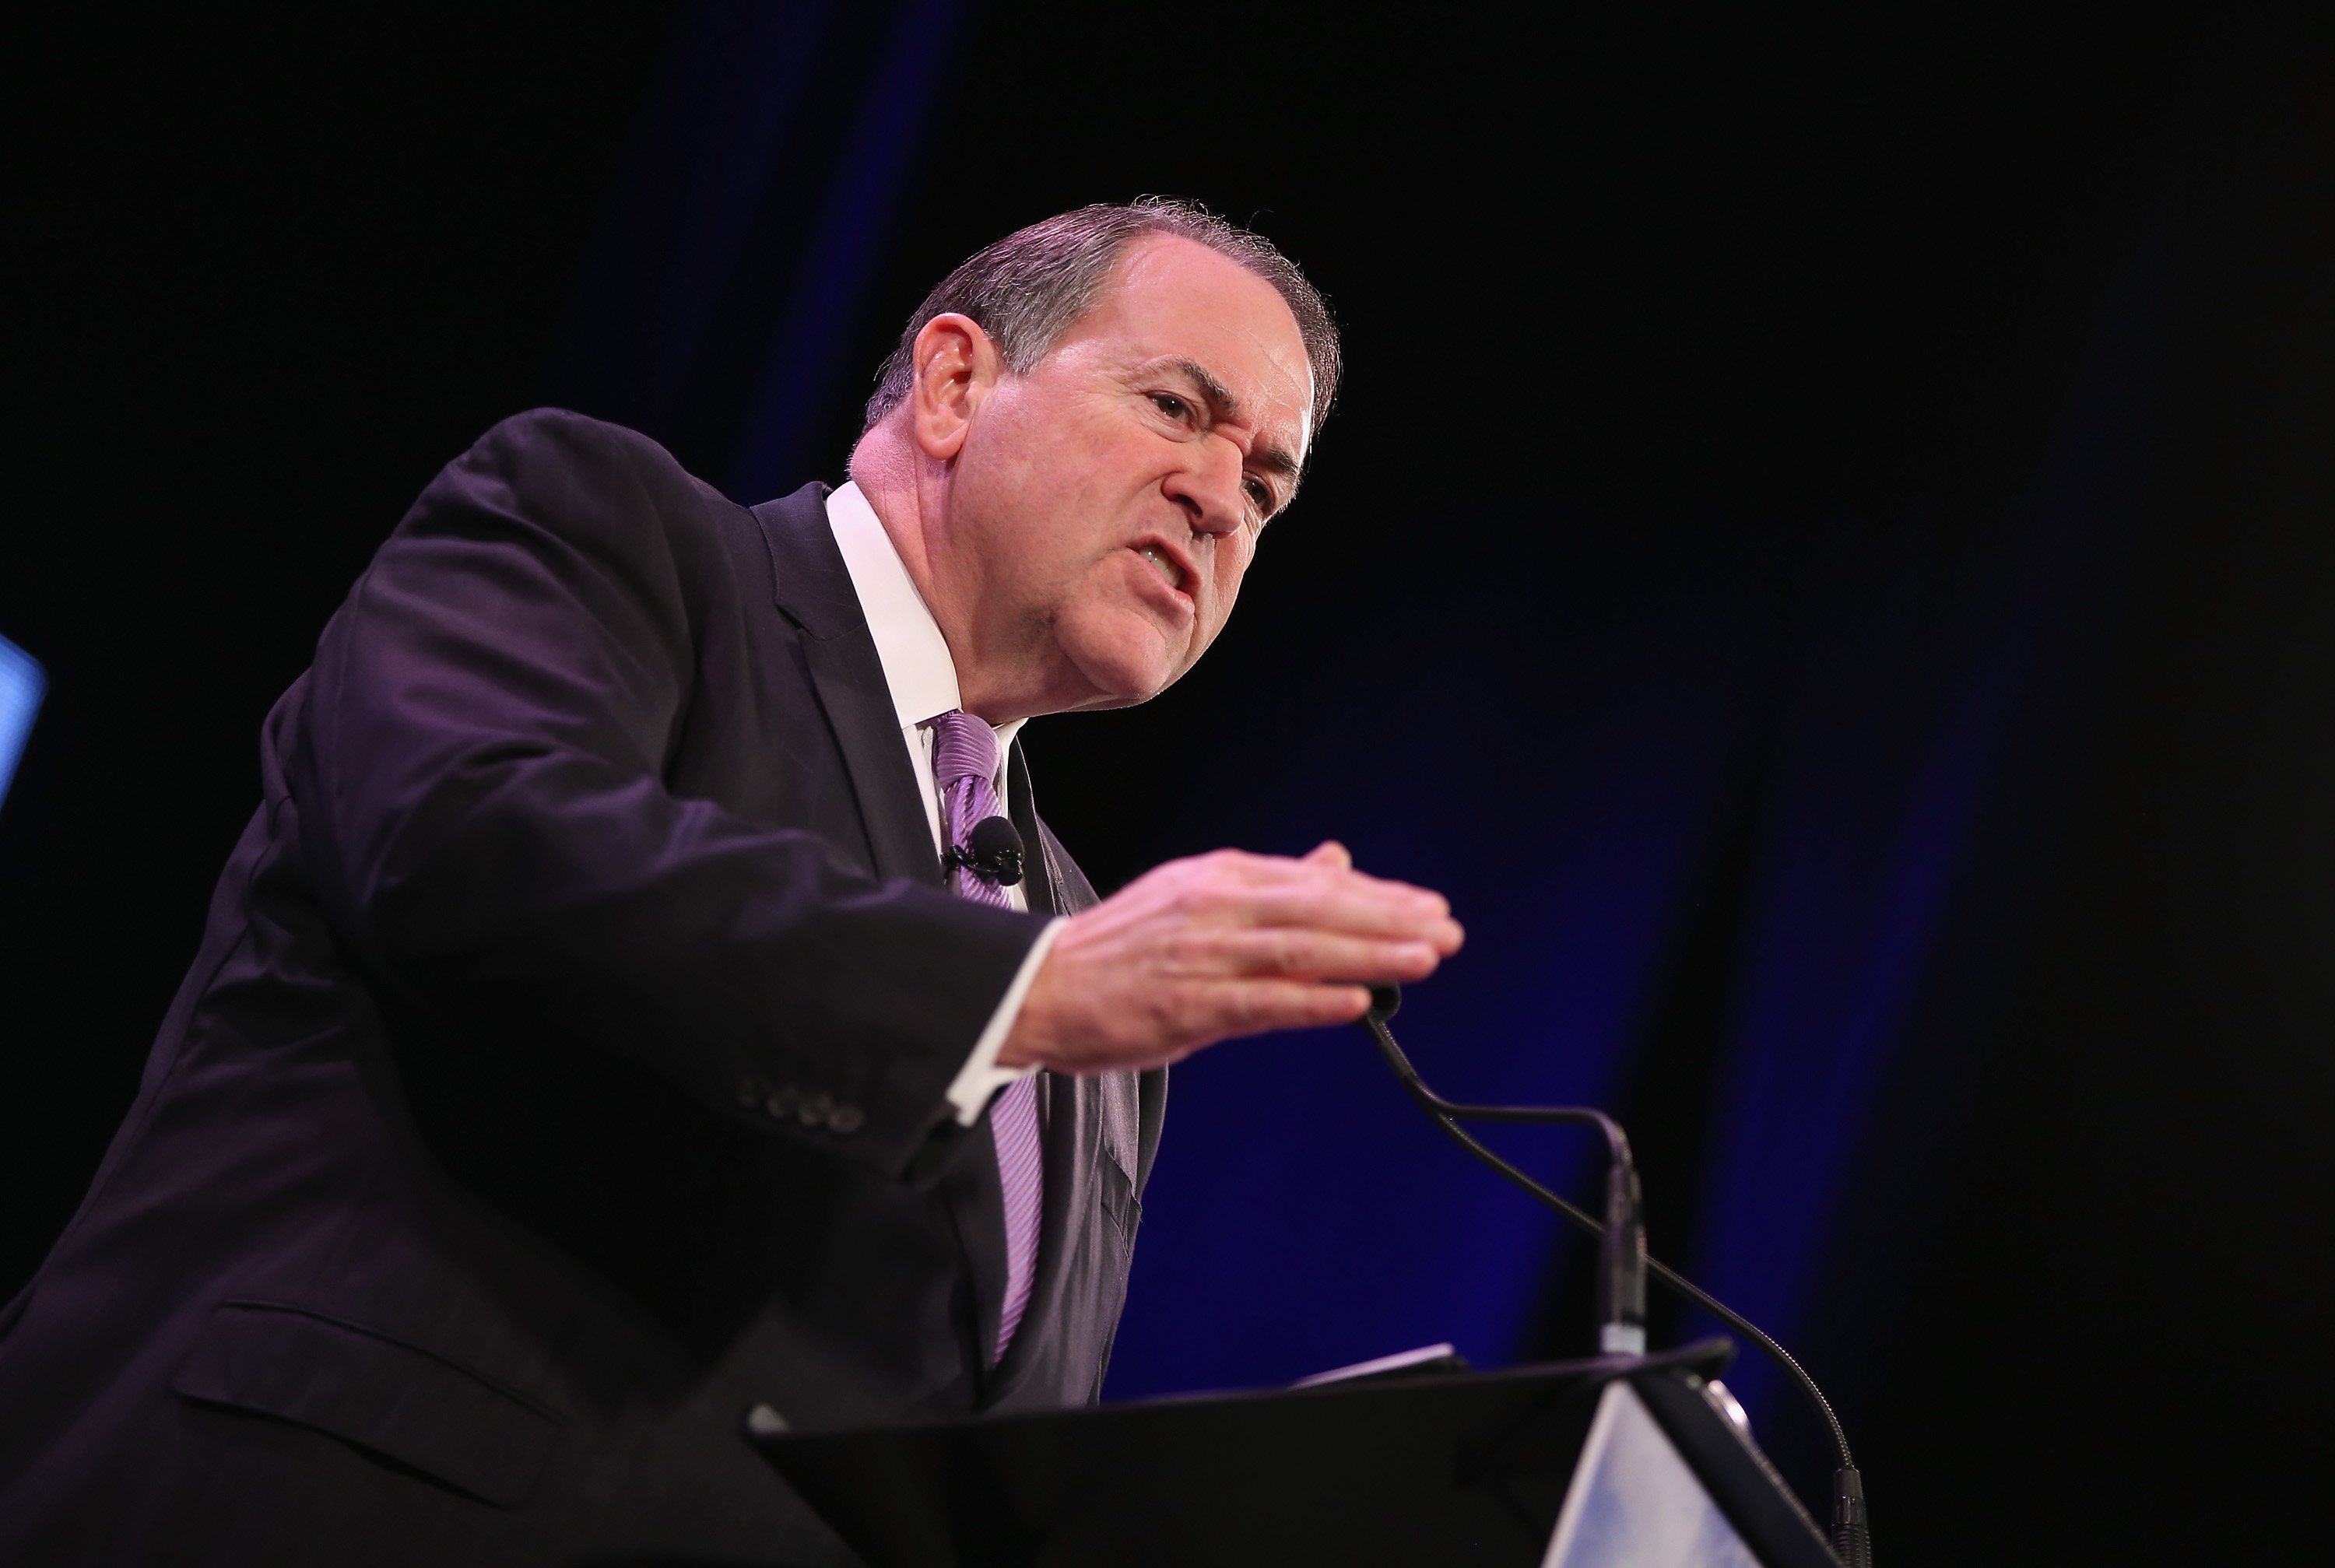 Mike Huckabee slams Obama for letting daughters listen to 